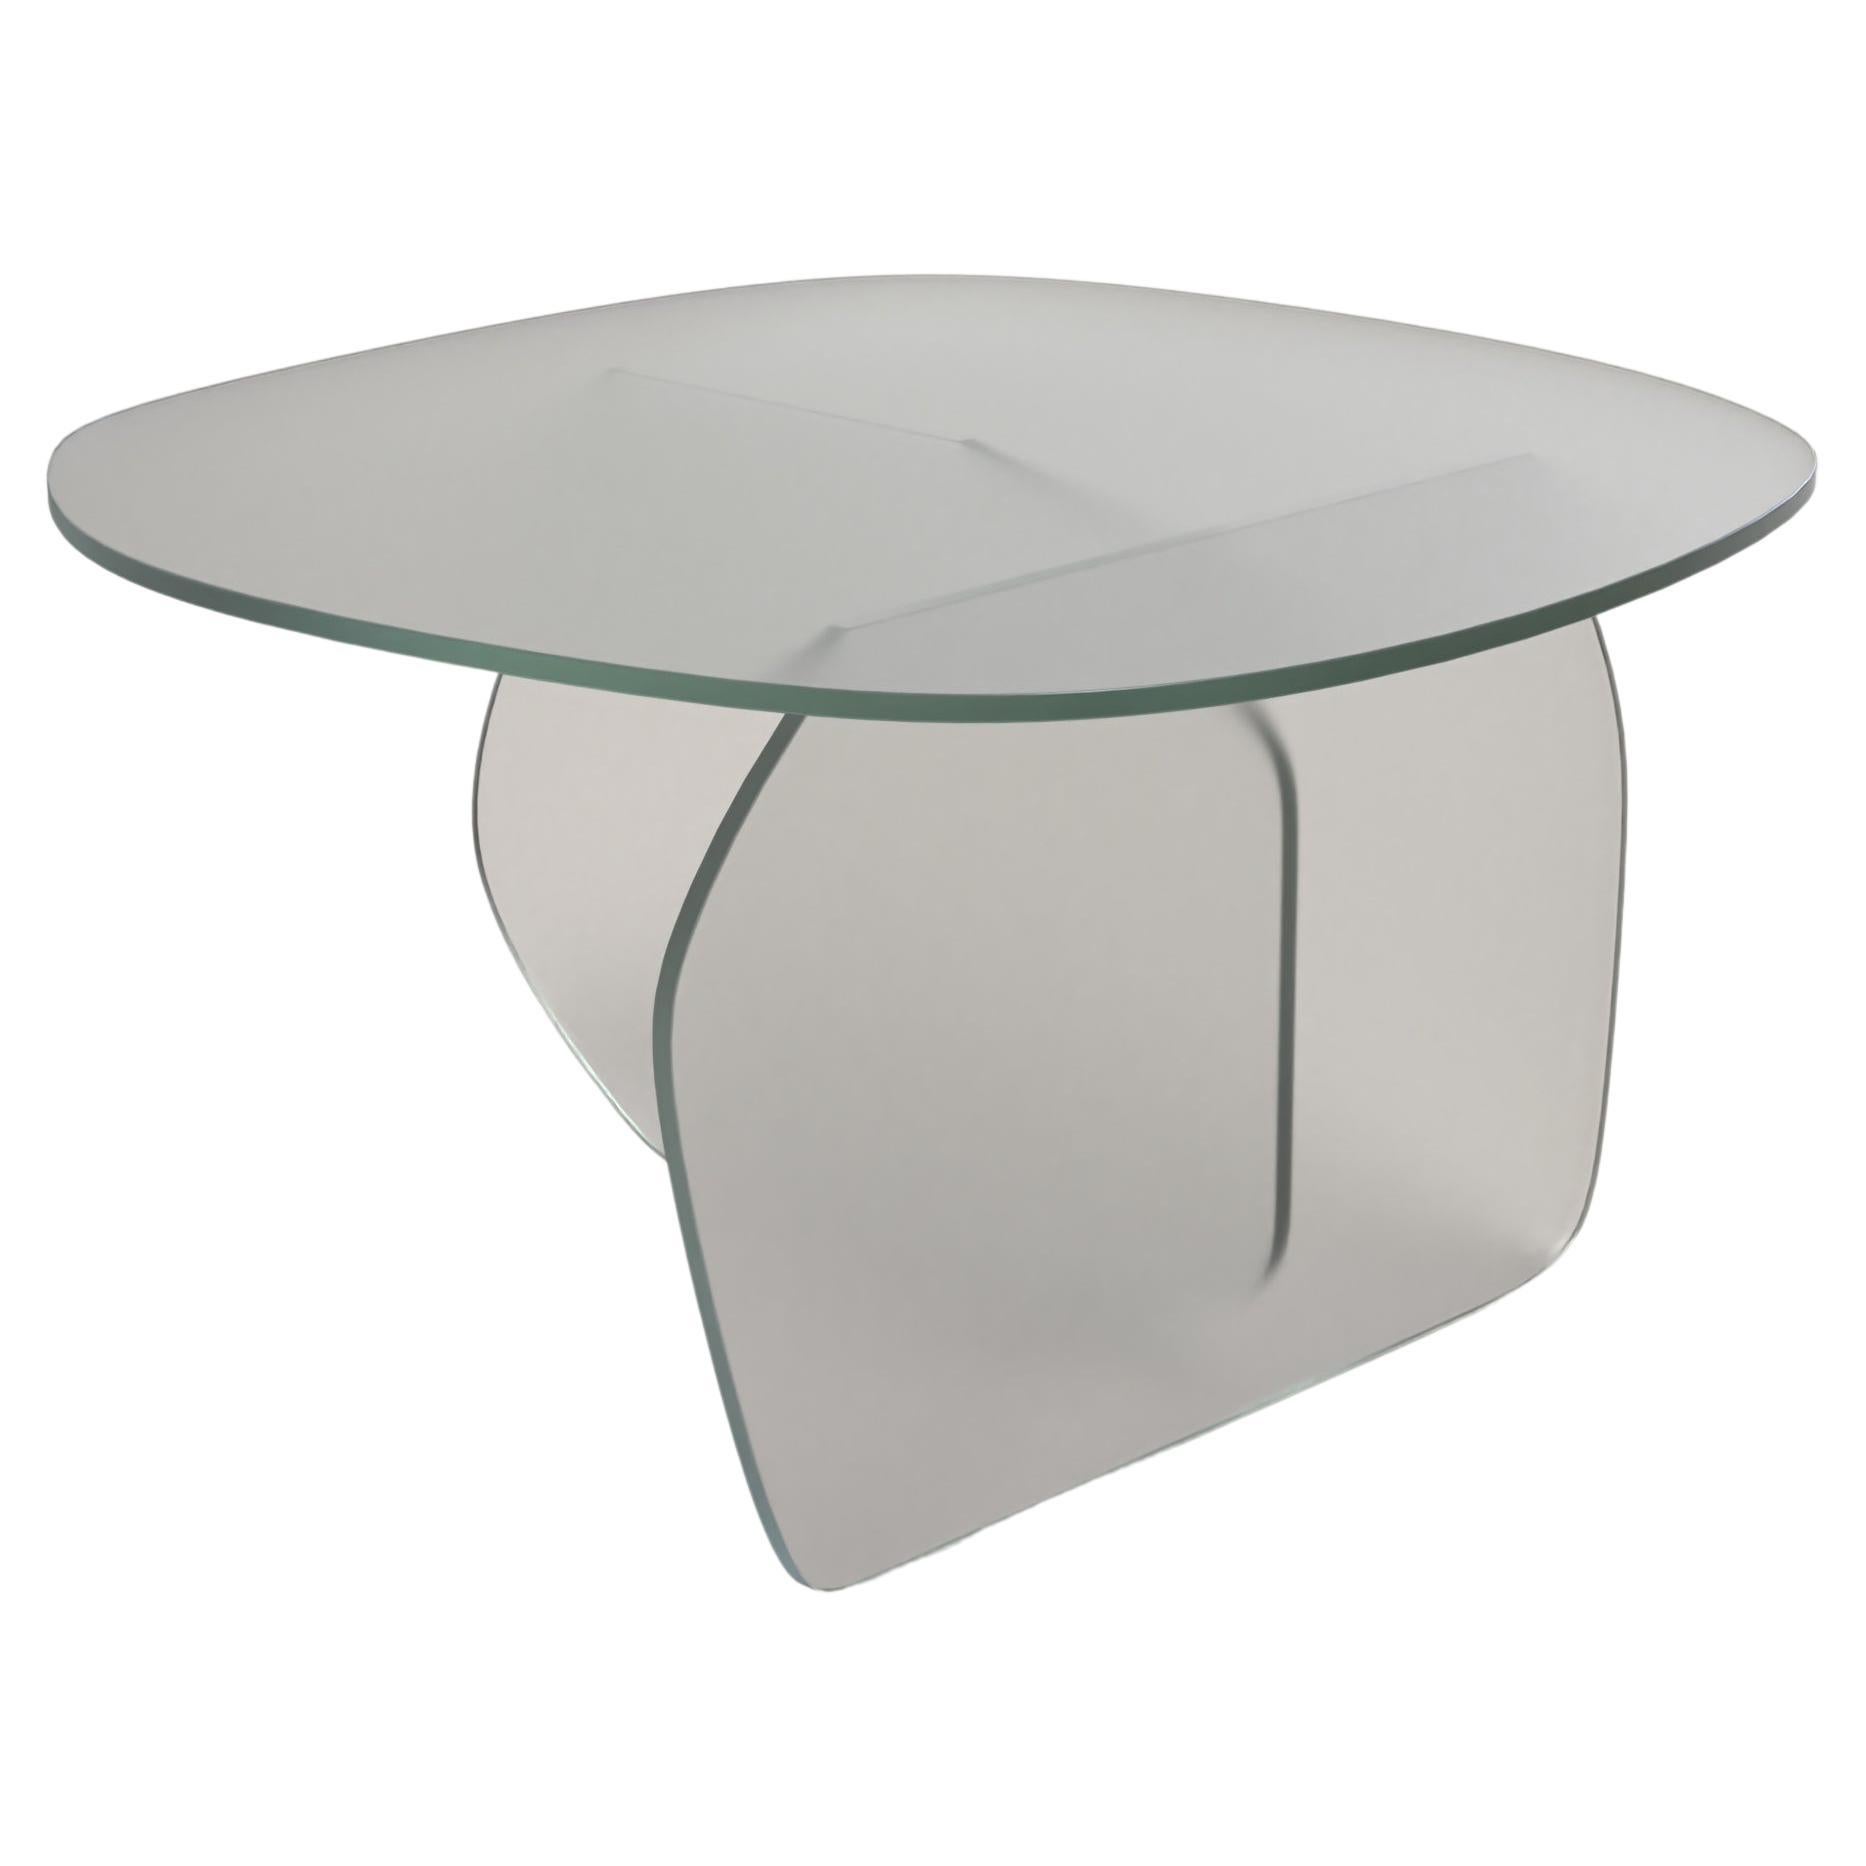 Contemporary Limited Edition Clear Glass Table, Panorama V2 by Edizione Limitata For Sale